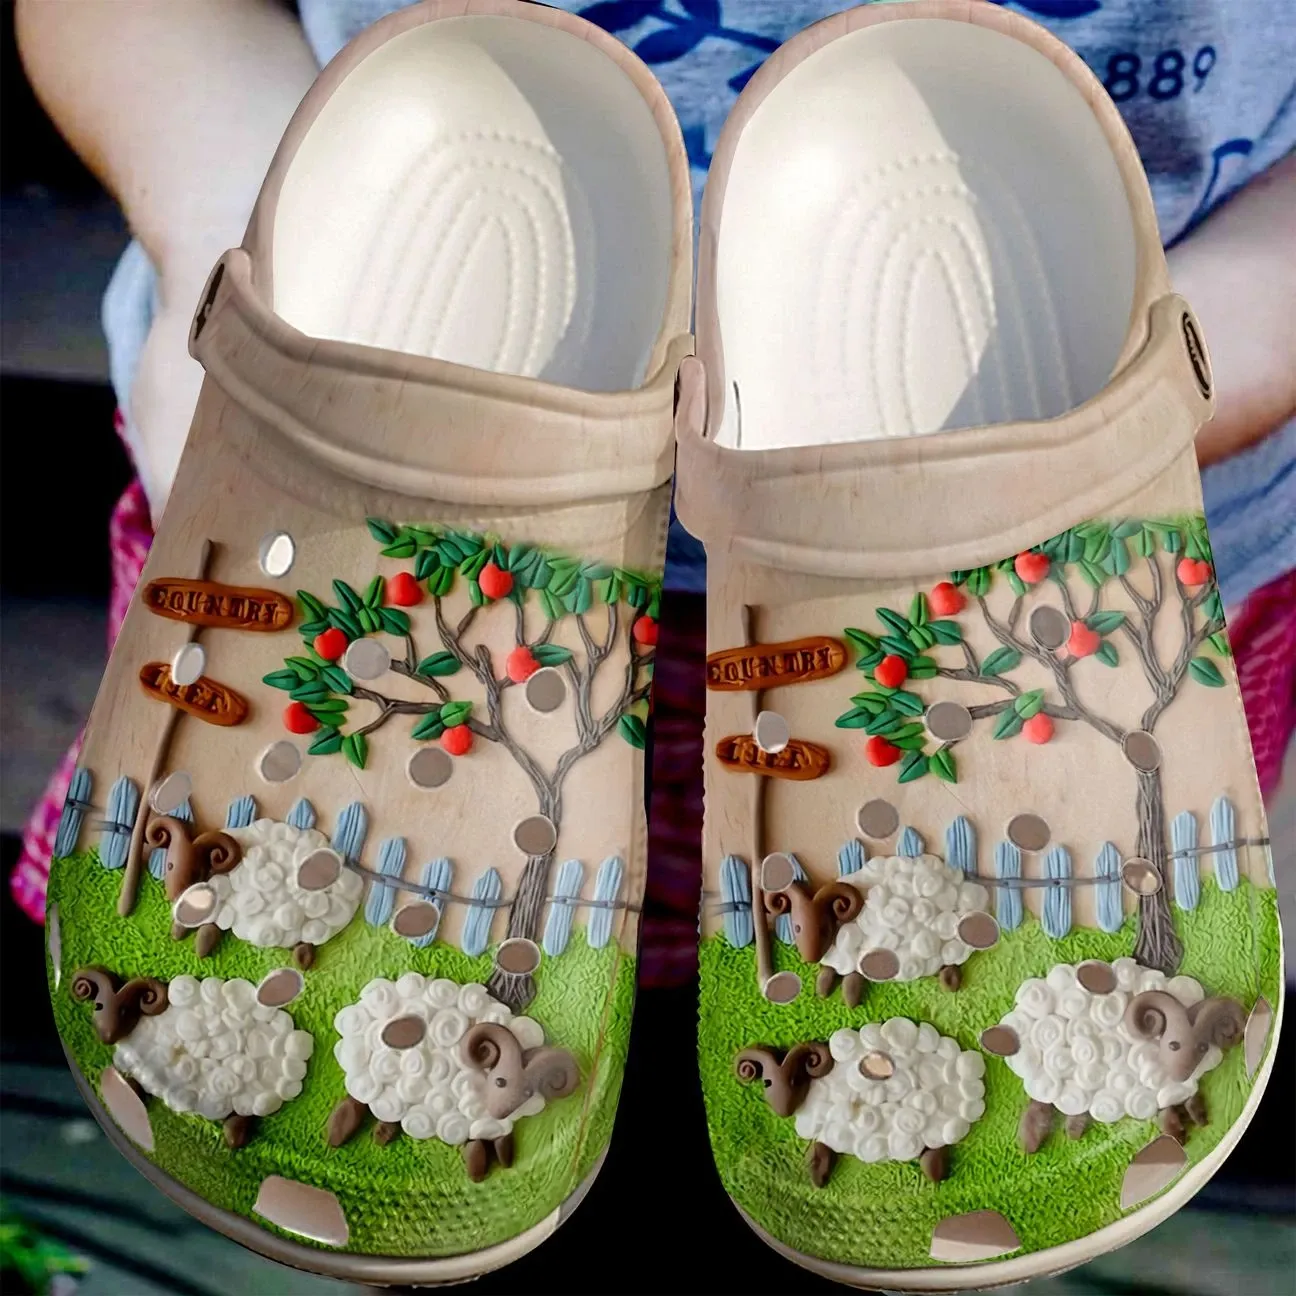 Sheep Personalized Clog Custom Crocs Comfortablefashion Style Comfortable For Women Men Kid Print 3D Country Life